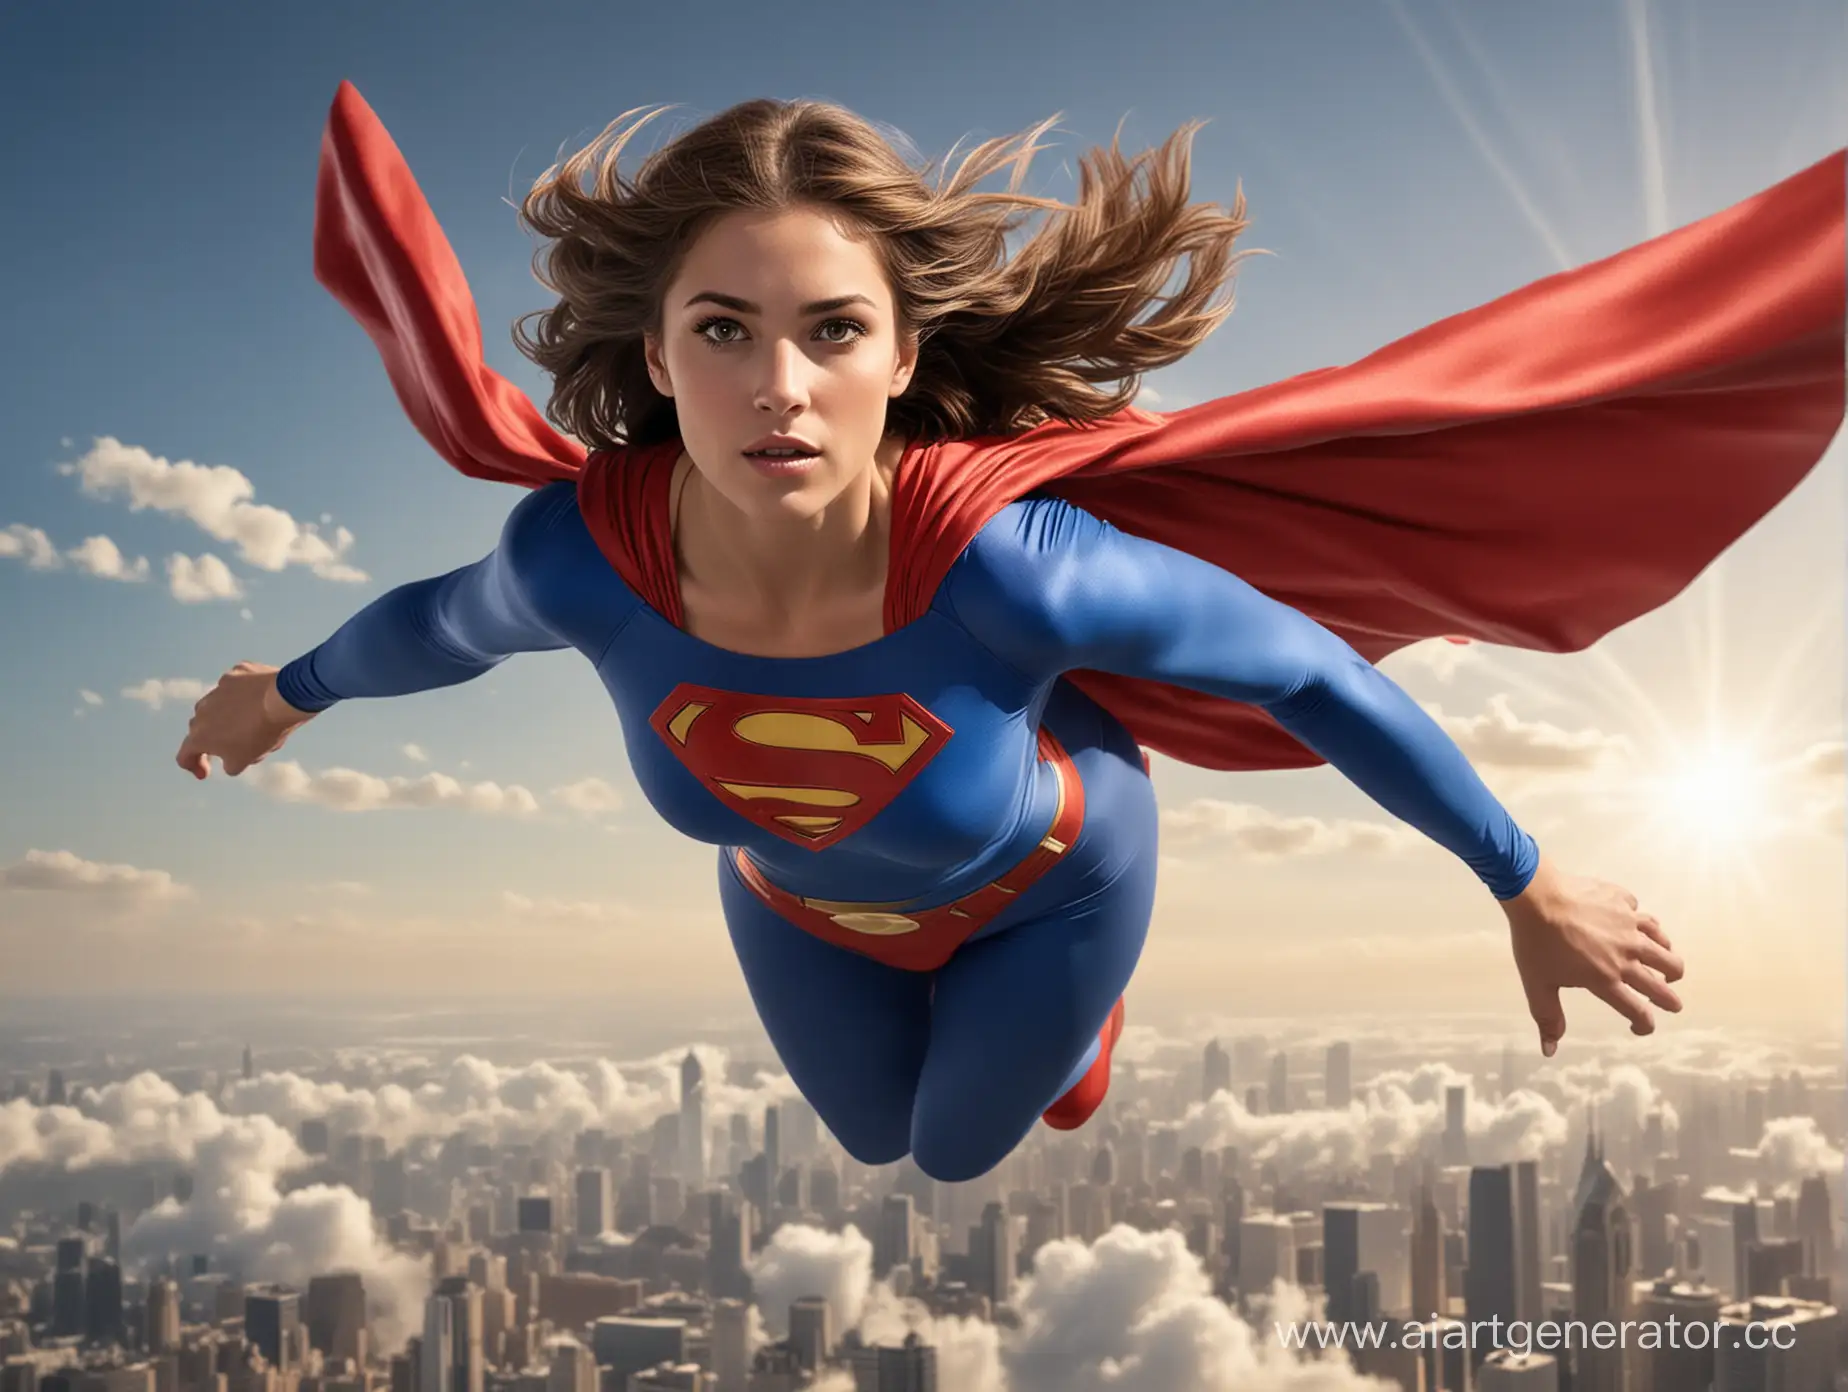 A pretty woman with brown hair, age 20, she is flying in the sky like Superman, she is serious and determined, her body is very muscular, she is wearing the classic Superman costume, blue tights, red briefs